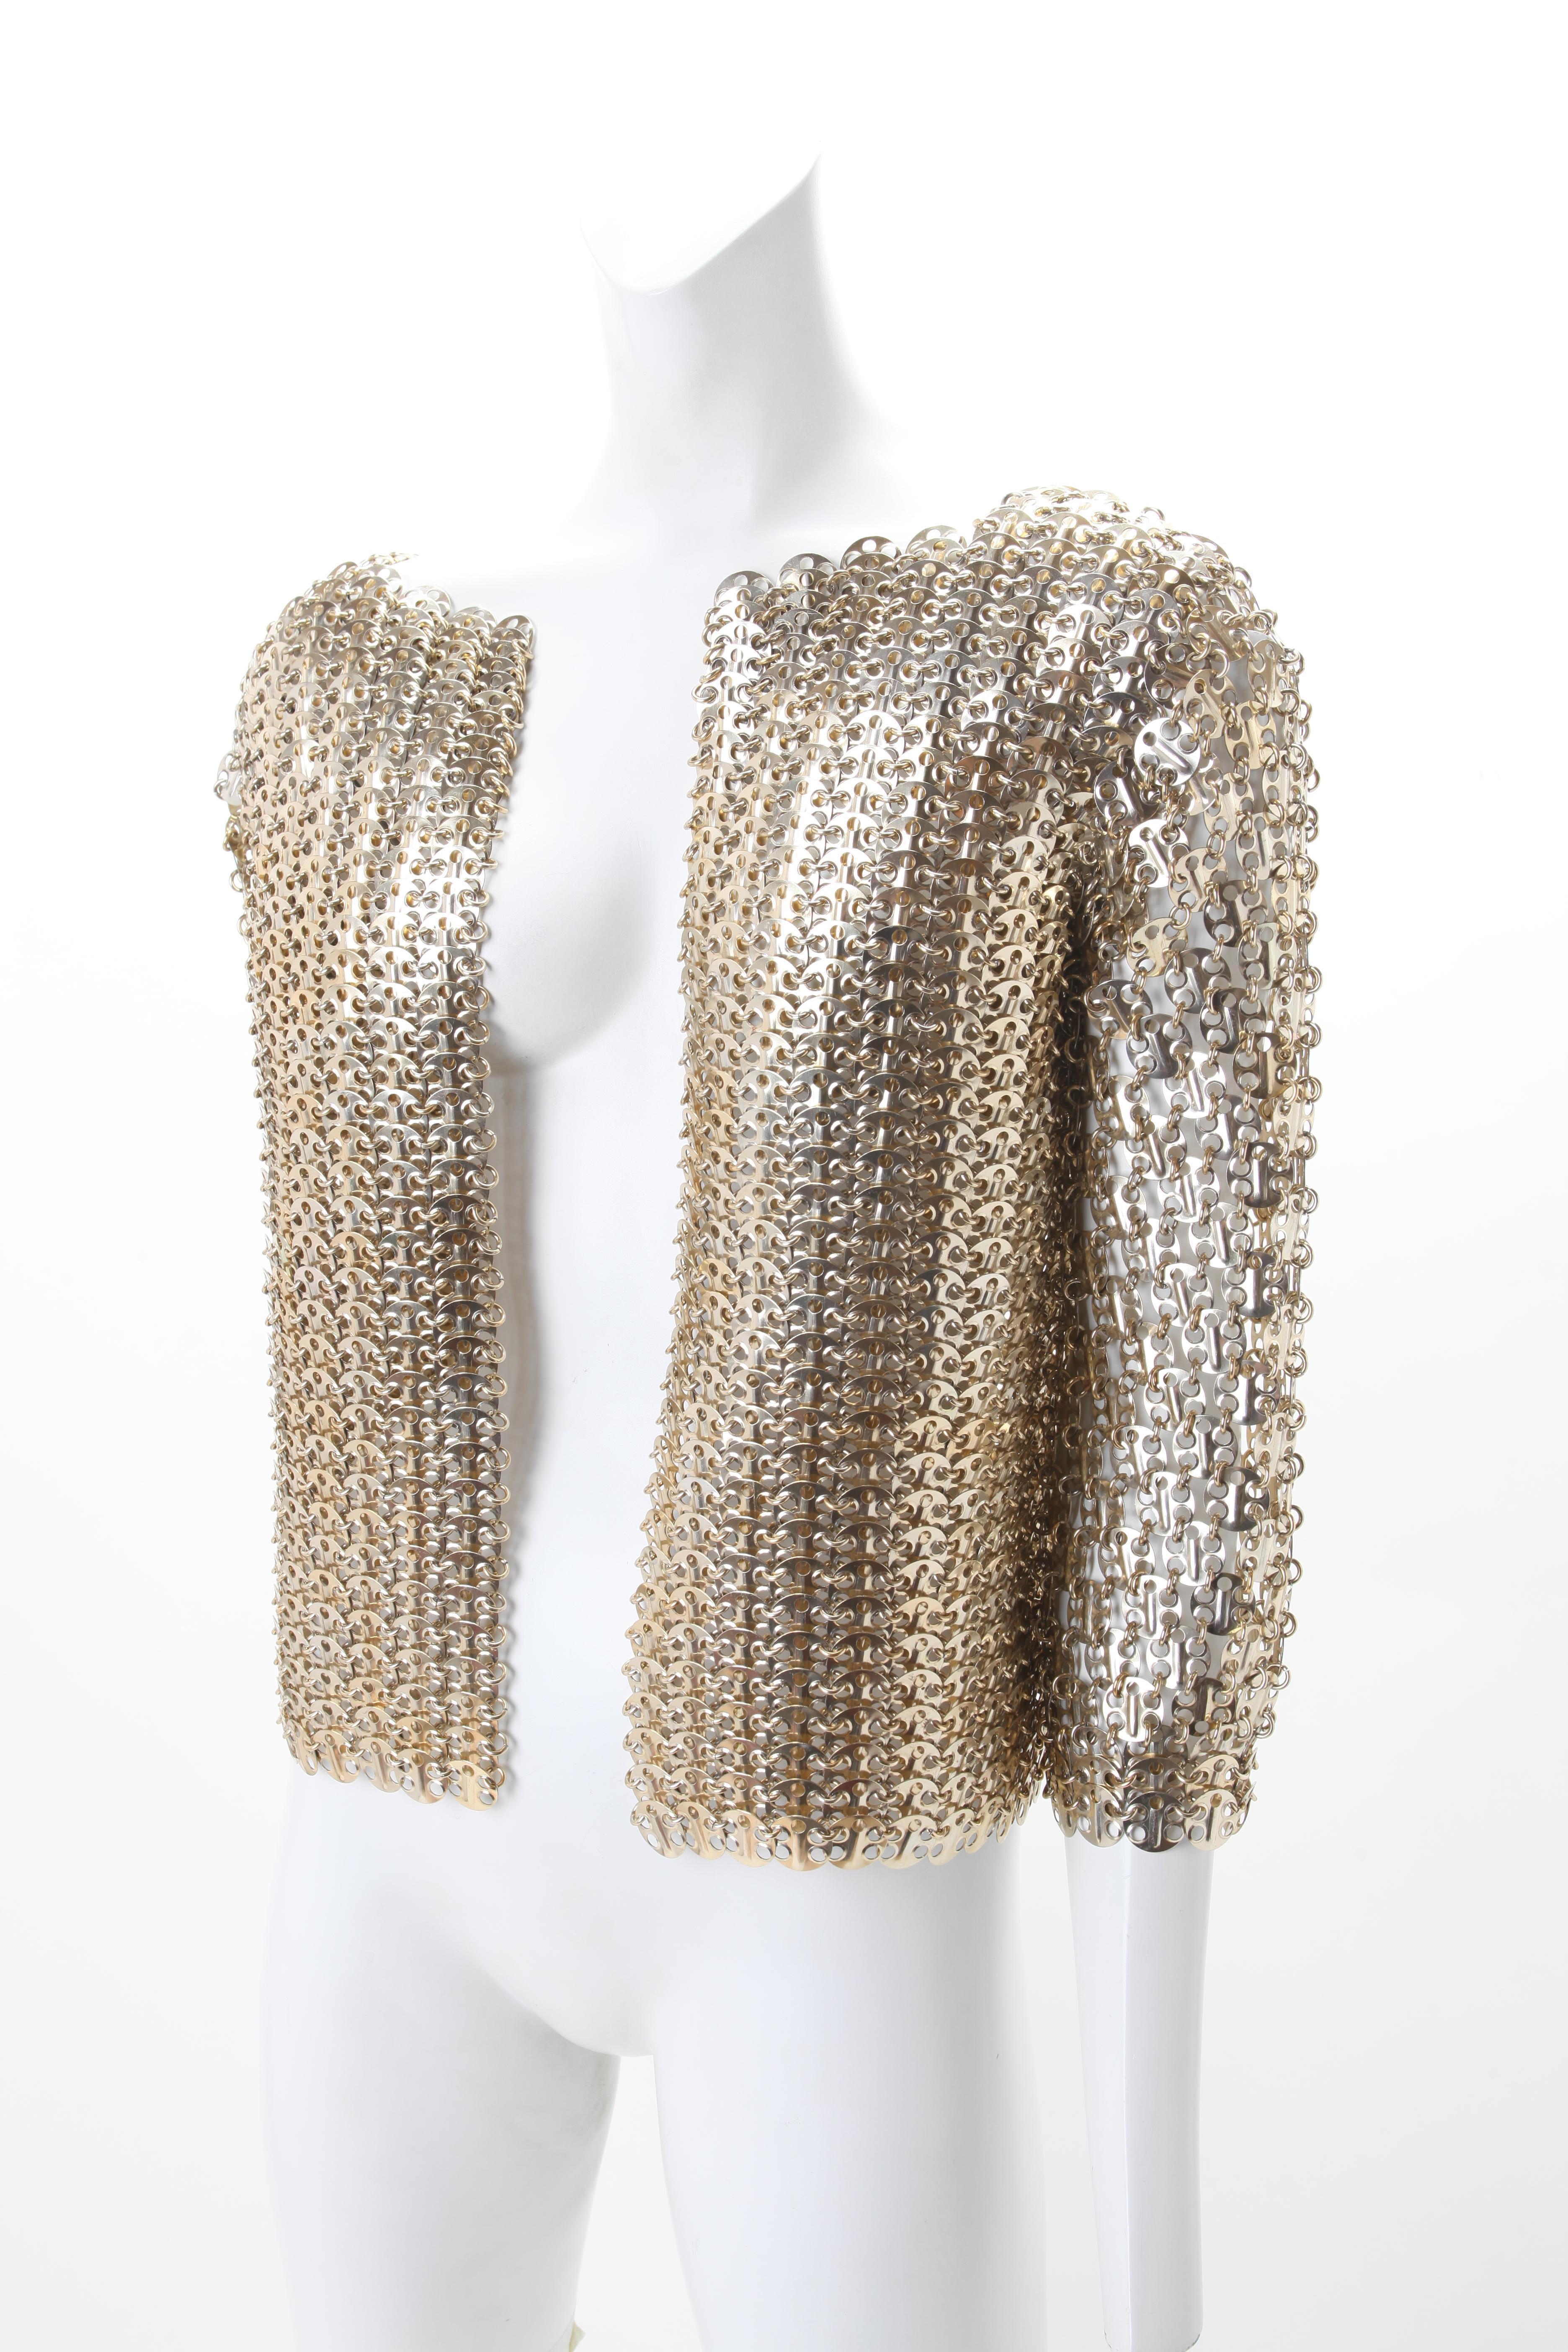 Rare 1960s Paco Rabbane Chainmail Jacket; Comprised of gold-tone linked metal discs. Open front with no closure.